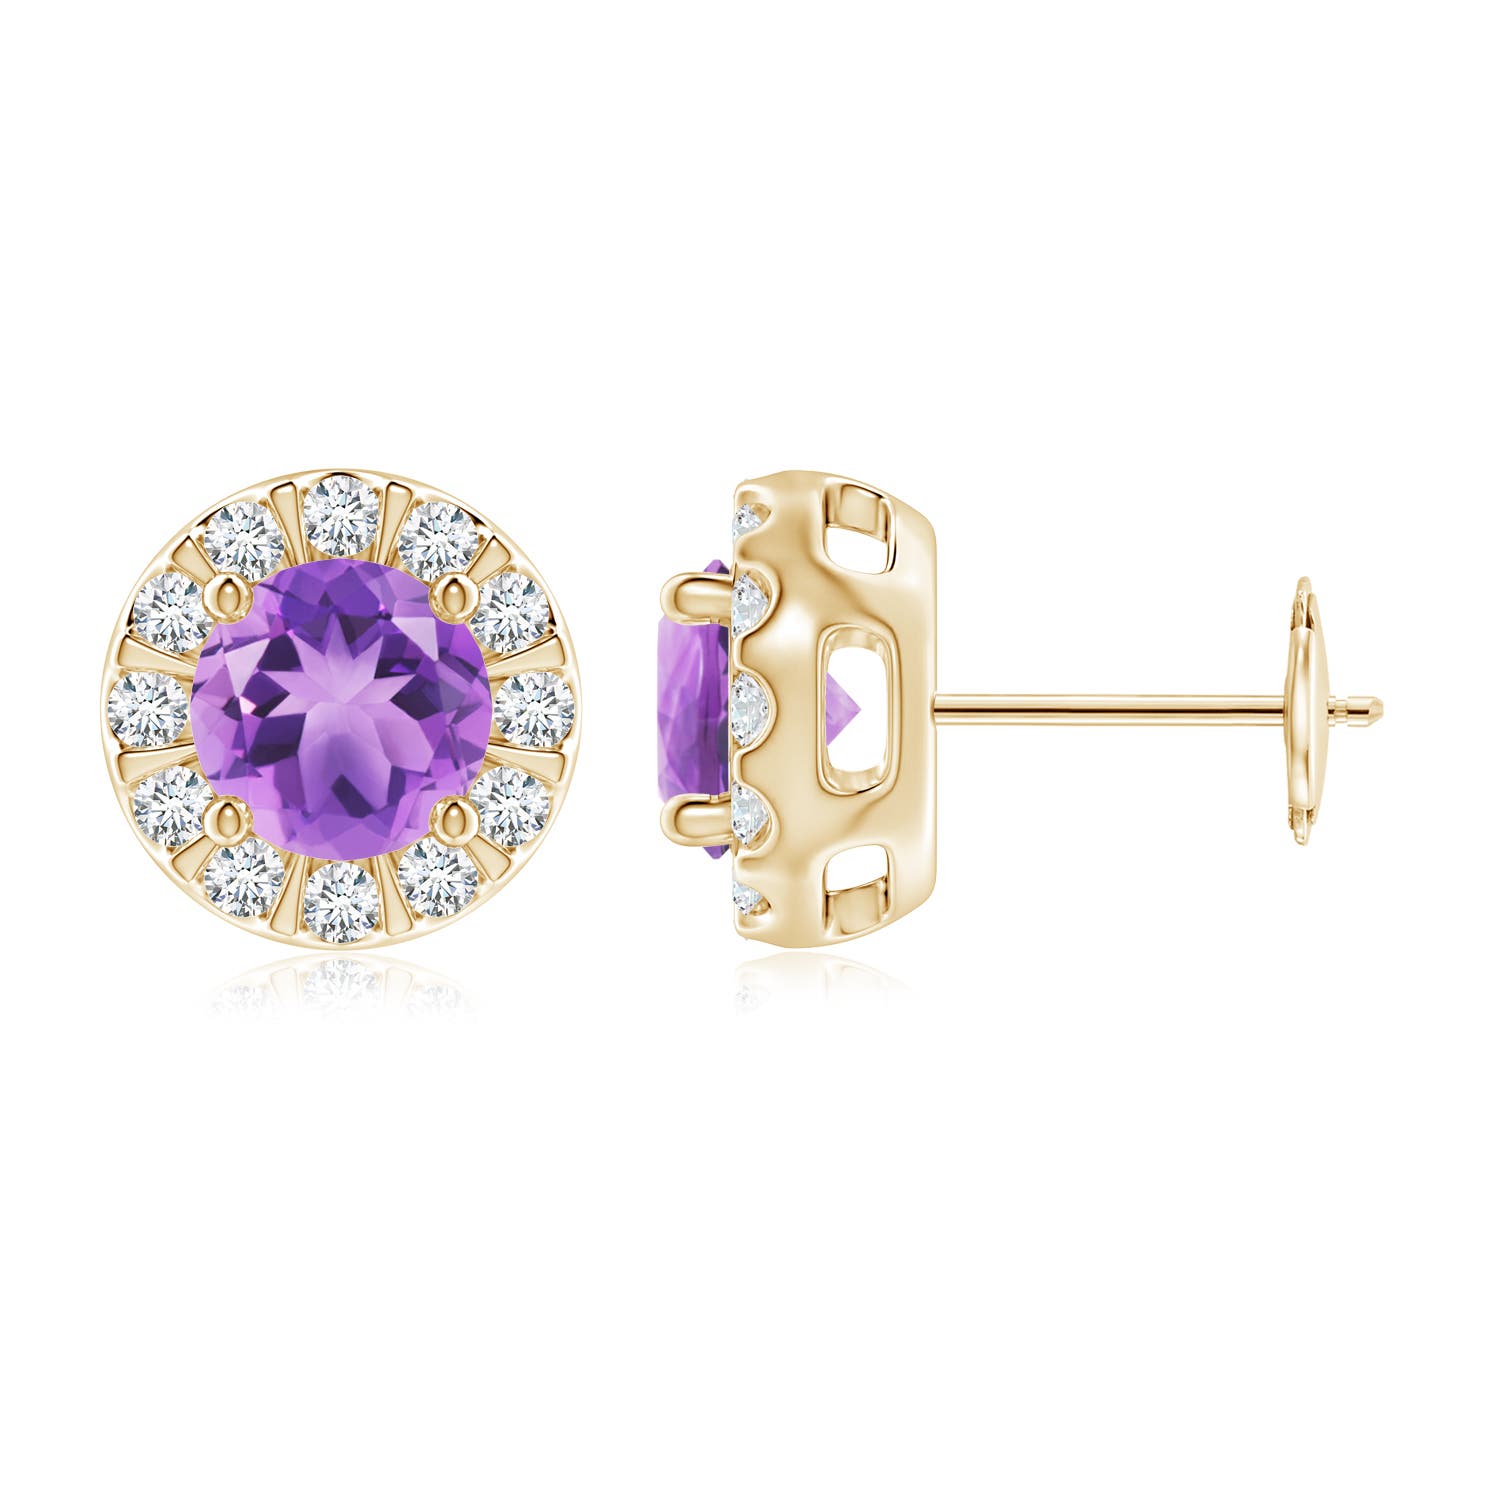 A - Amethyst / 2.03 CT / 14 KT Yellow Gold